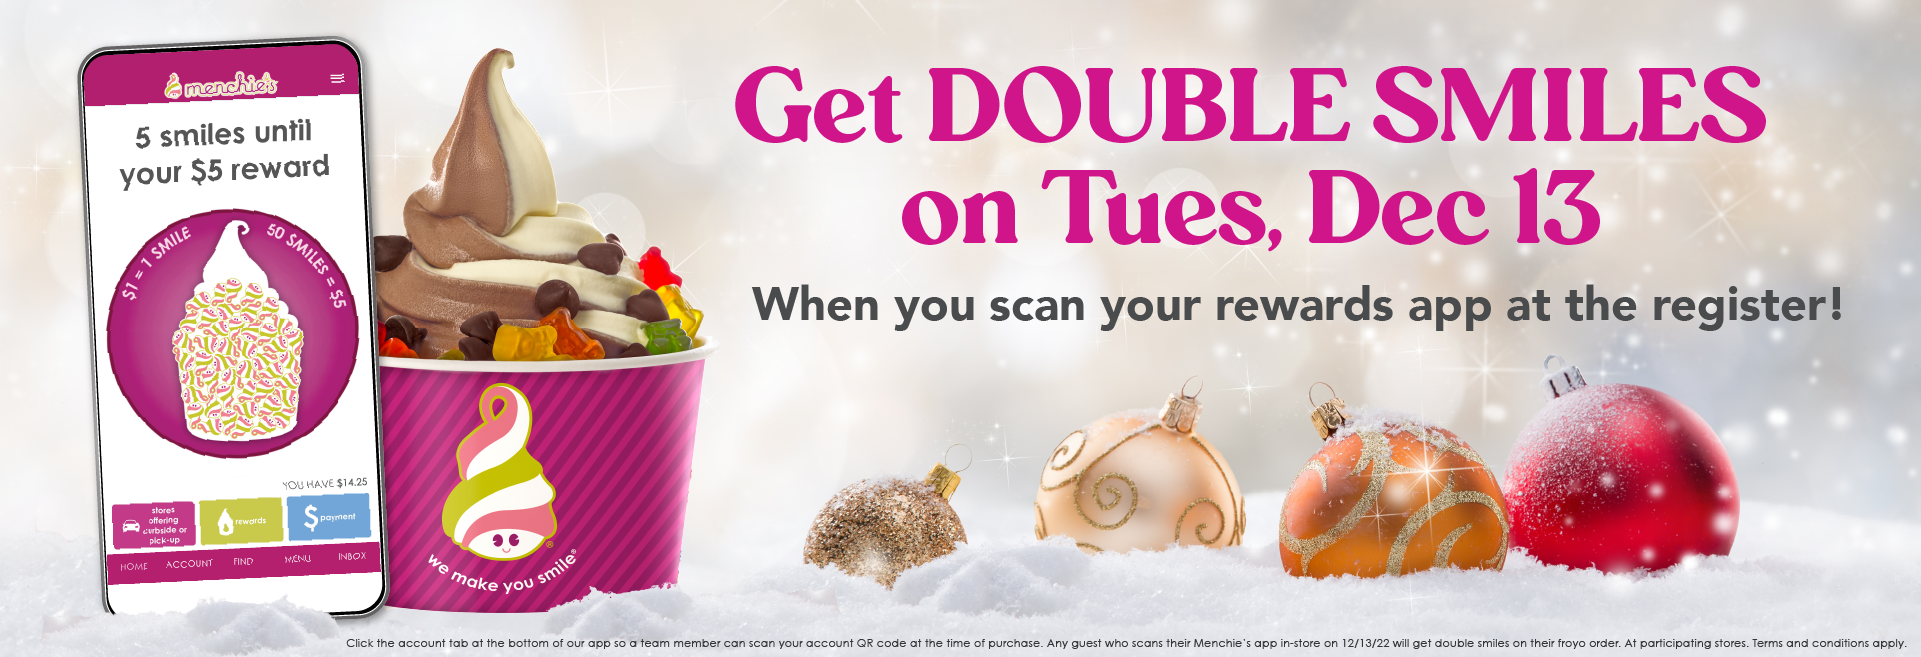 Earn double rewards on Tuesday, December 13th!